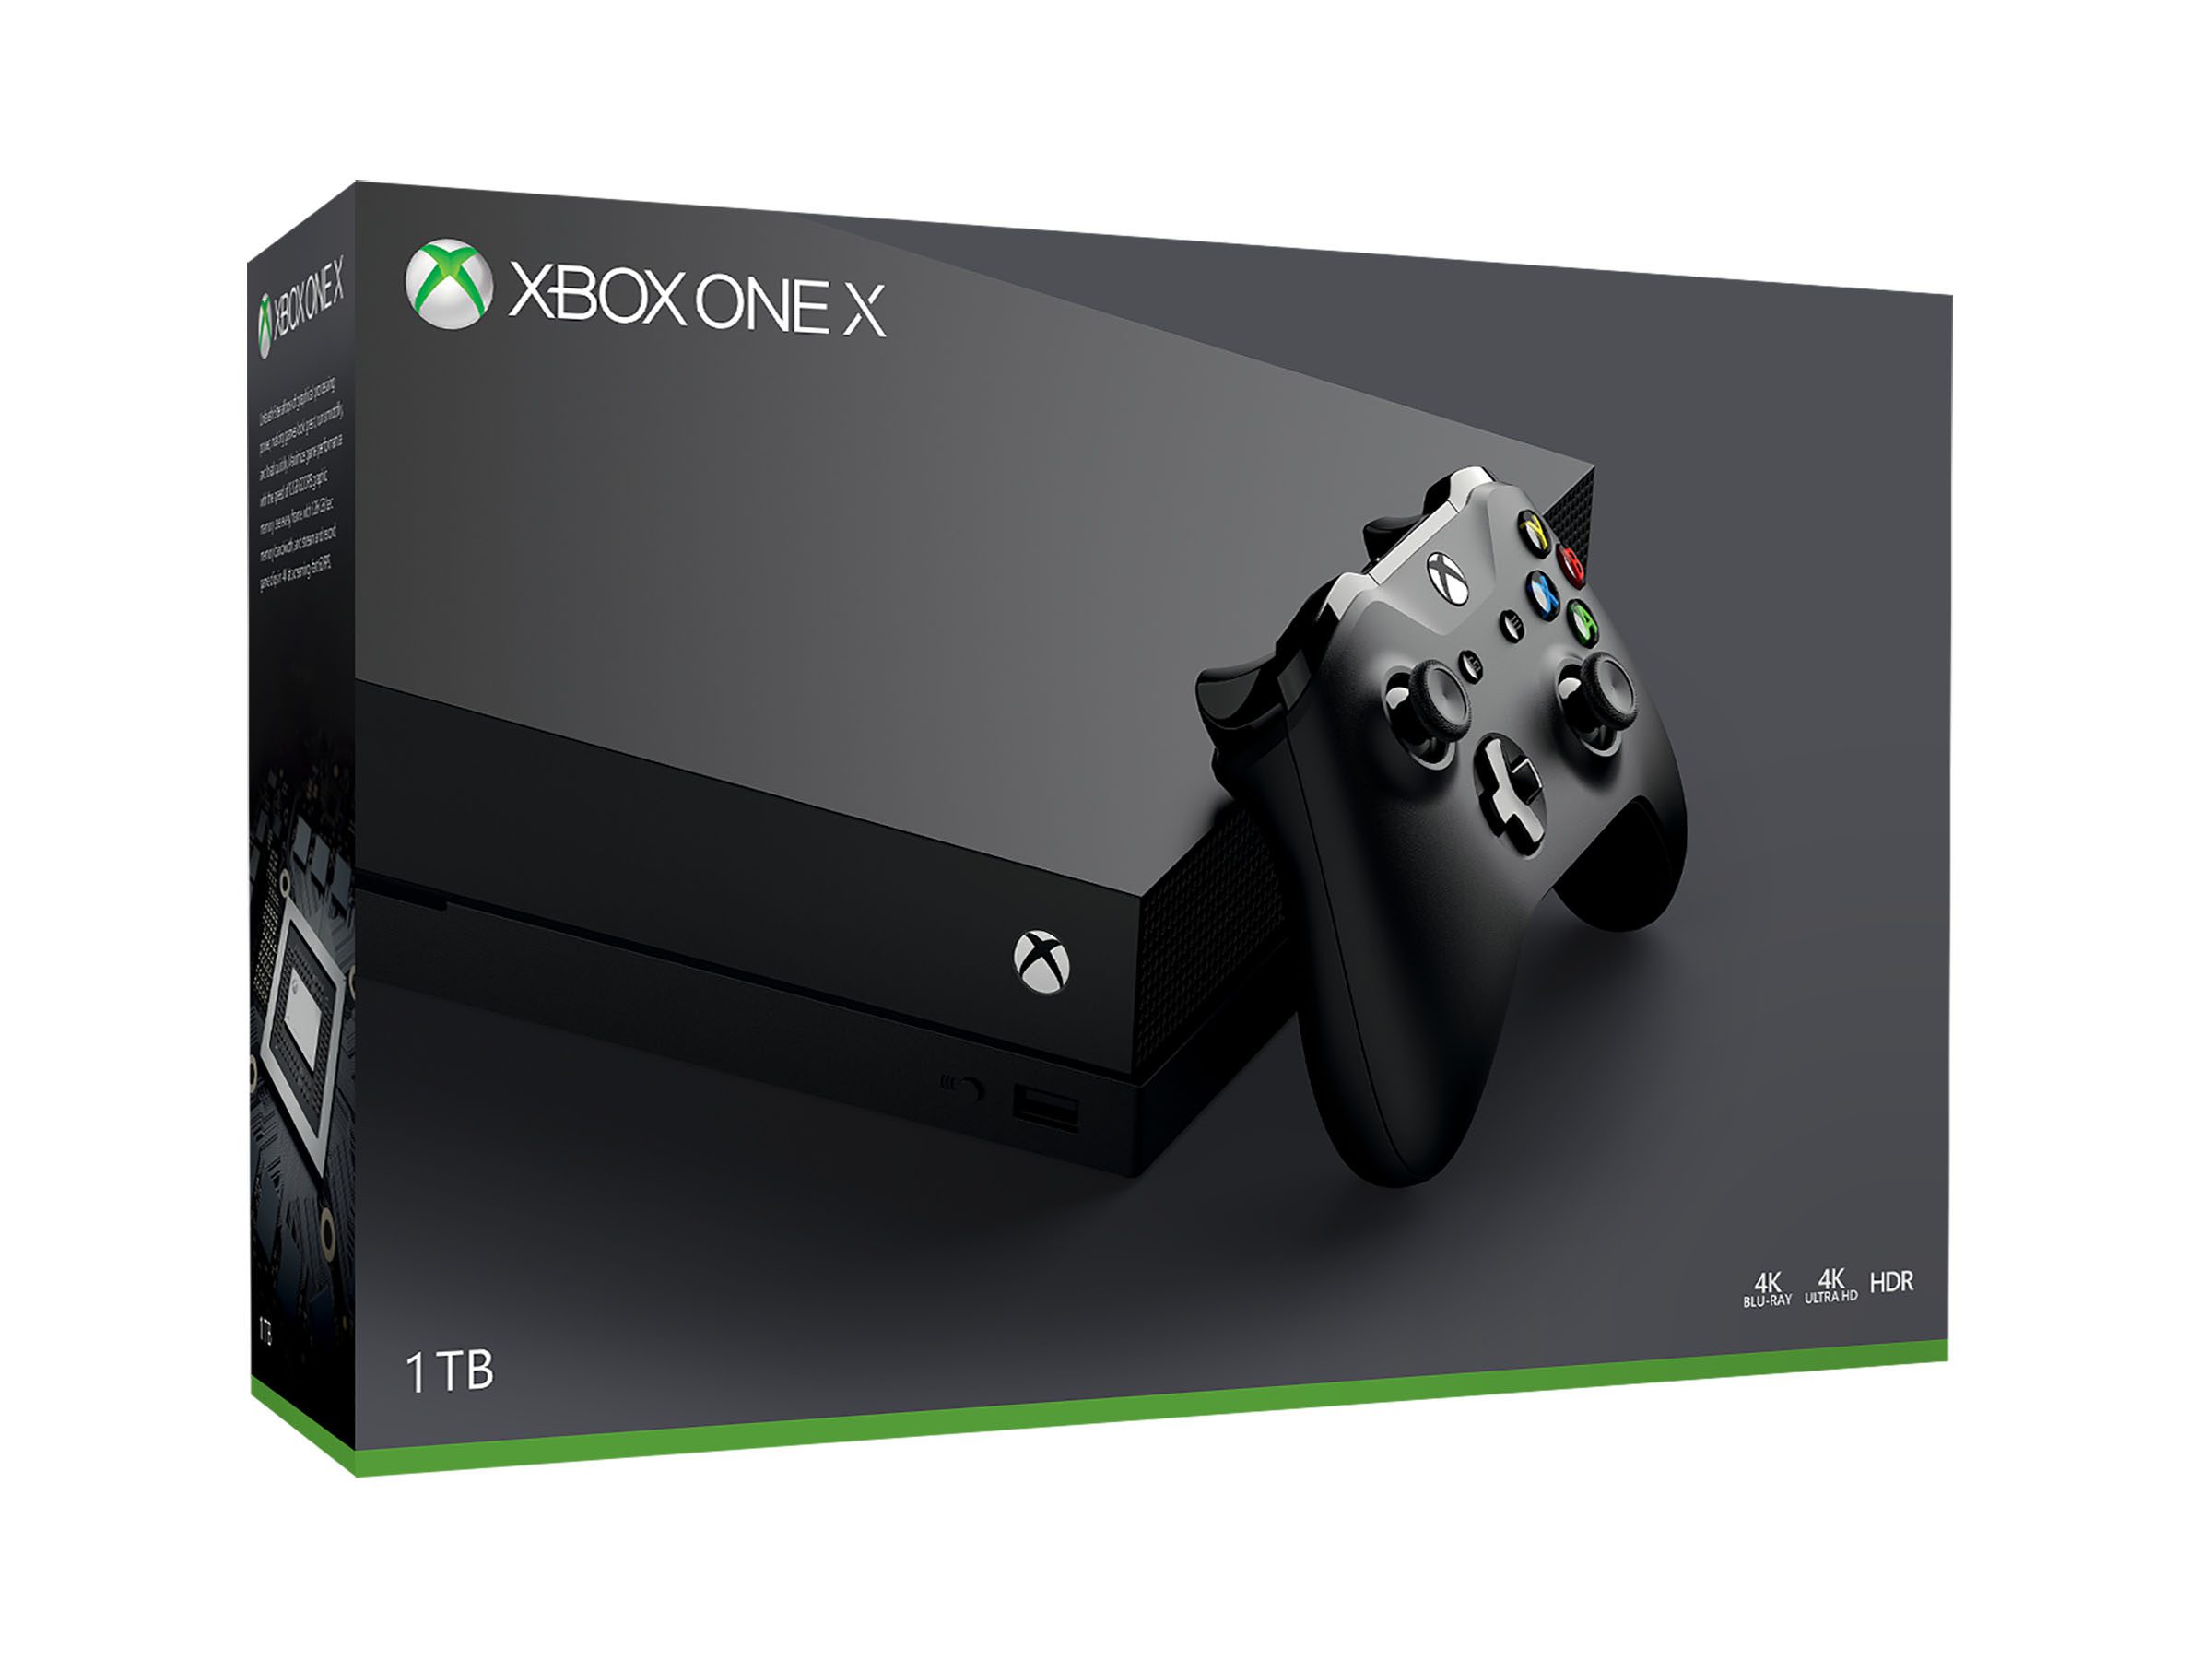 Microsoft Xbox One X 1Tb Disc Edition Console Black (Pre-Owned)